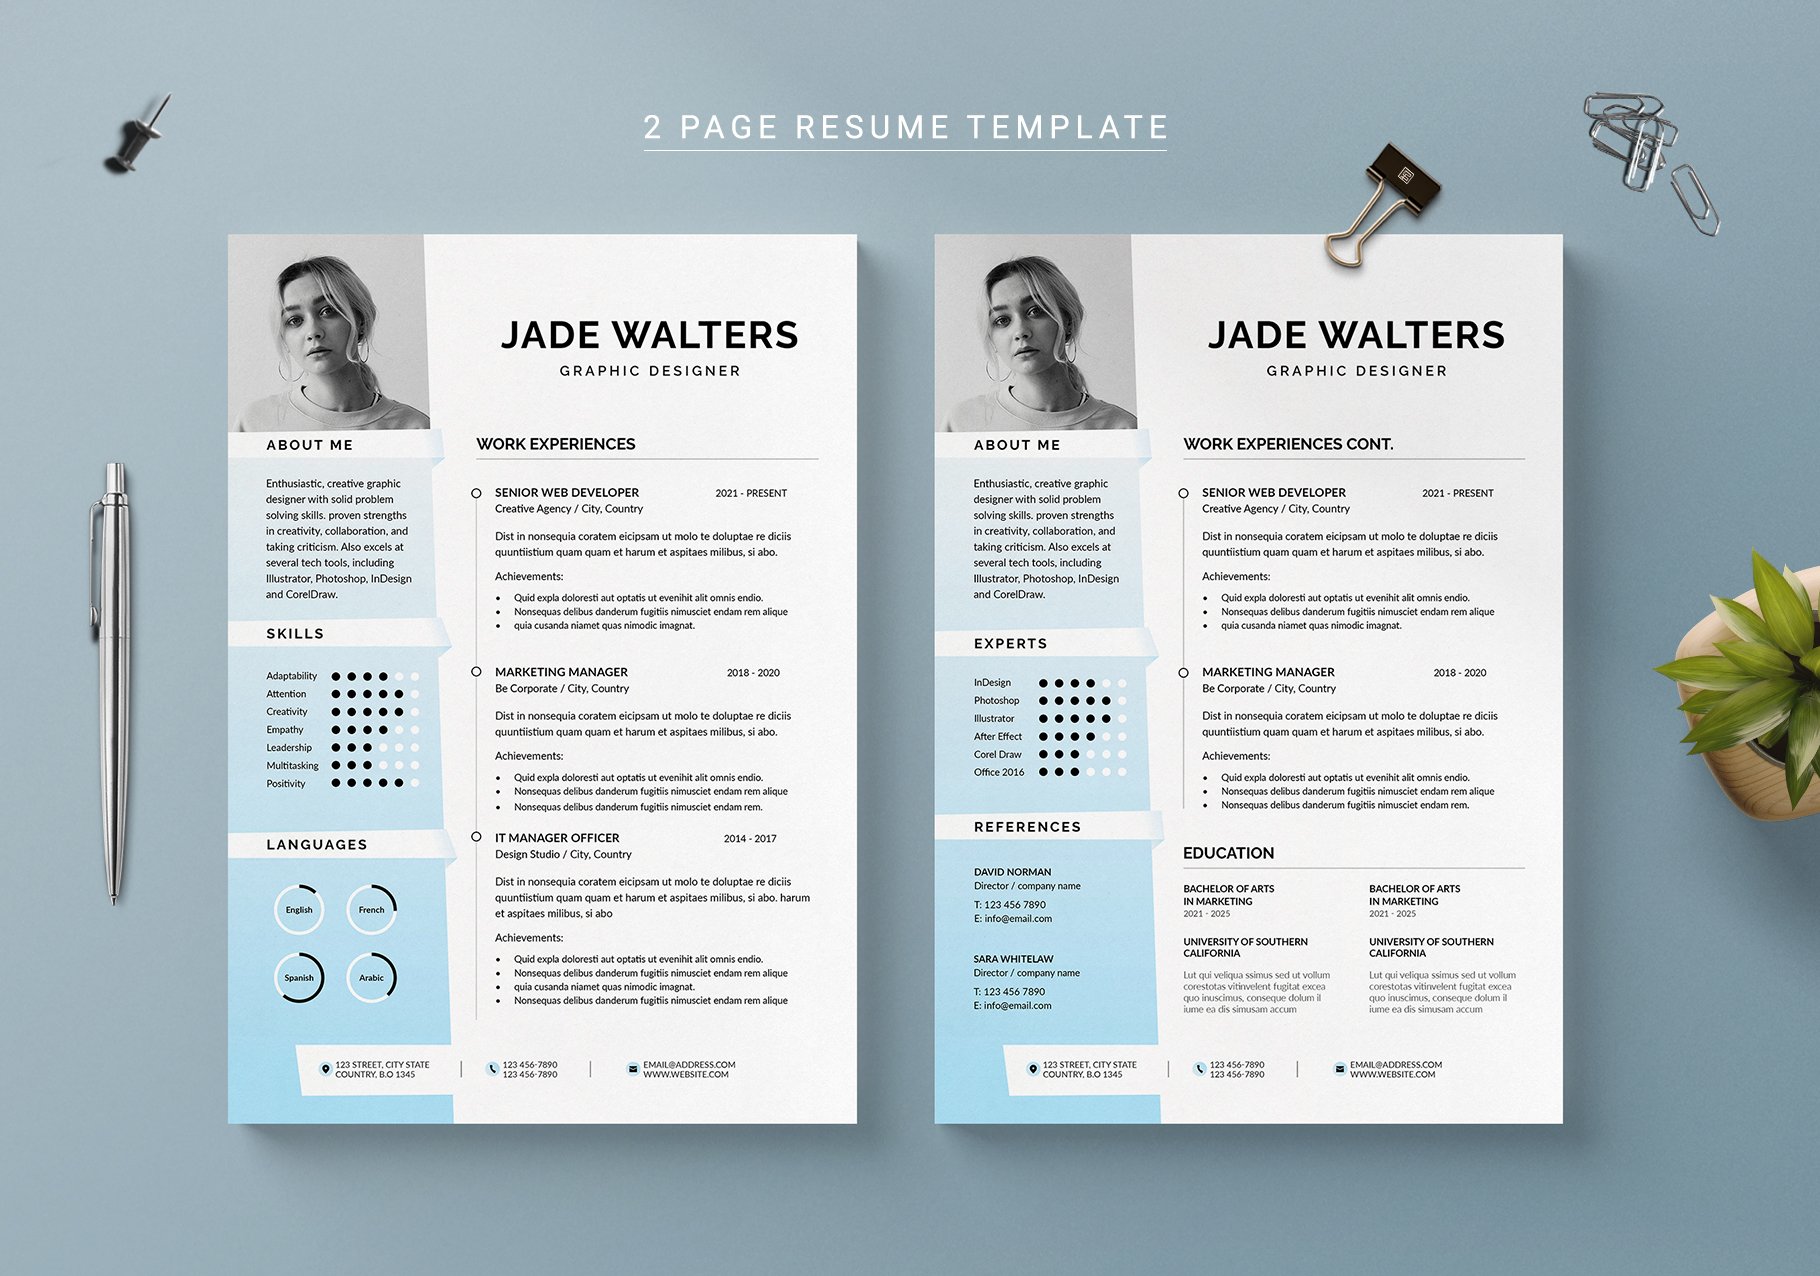 Word Resume - CV preview image.